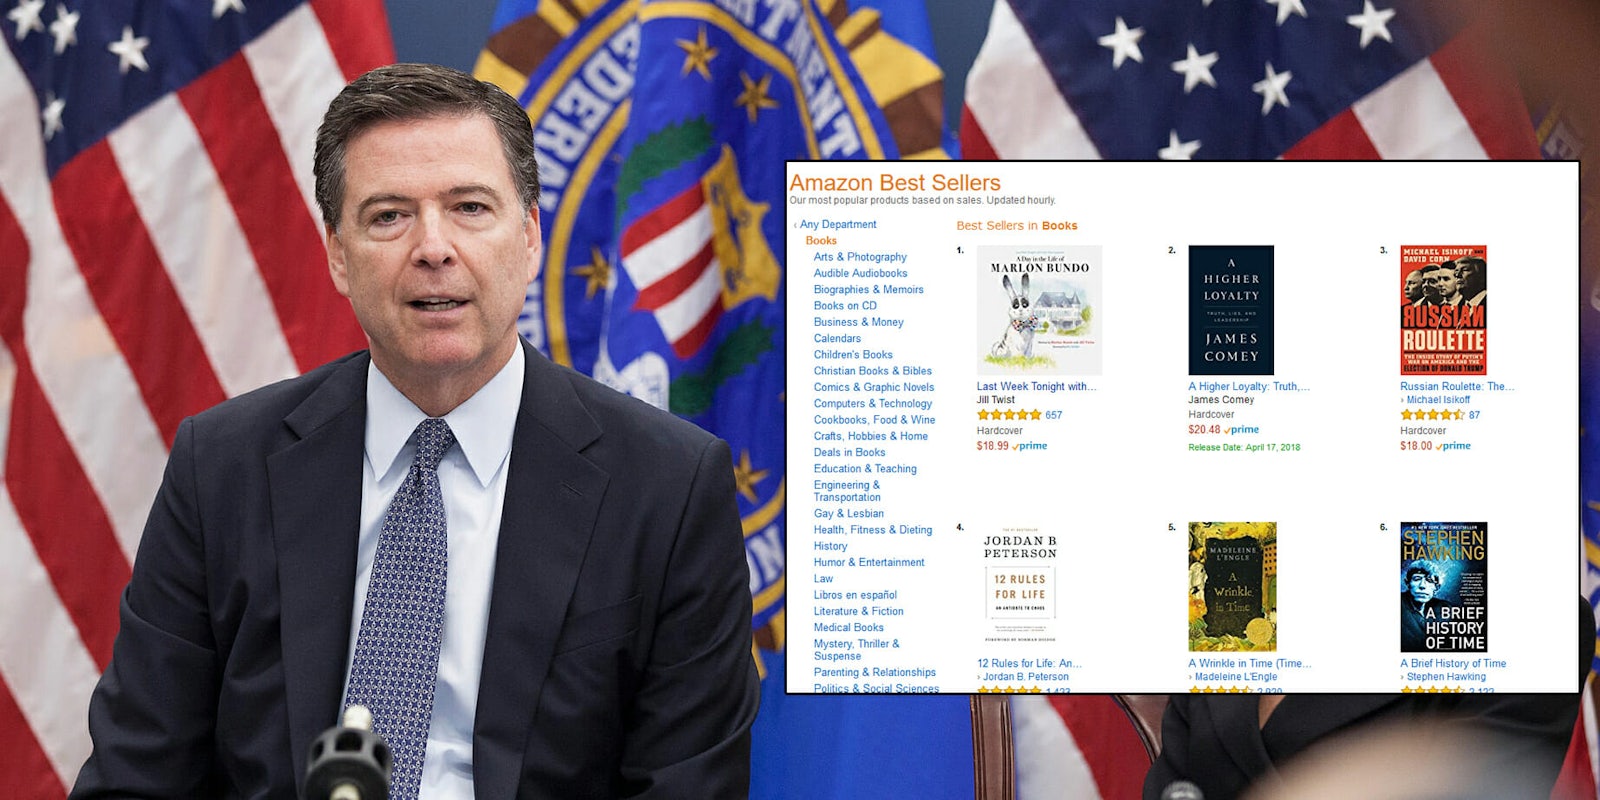 Former FBI Director James Comey's upcoming book, 'A Higher Loyalty: Truth, Lies, and Leadership,' jumped to the top of Amazon's best seller list over the weekend.